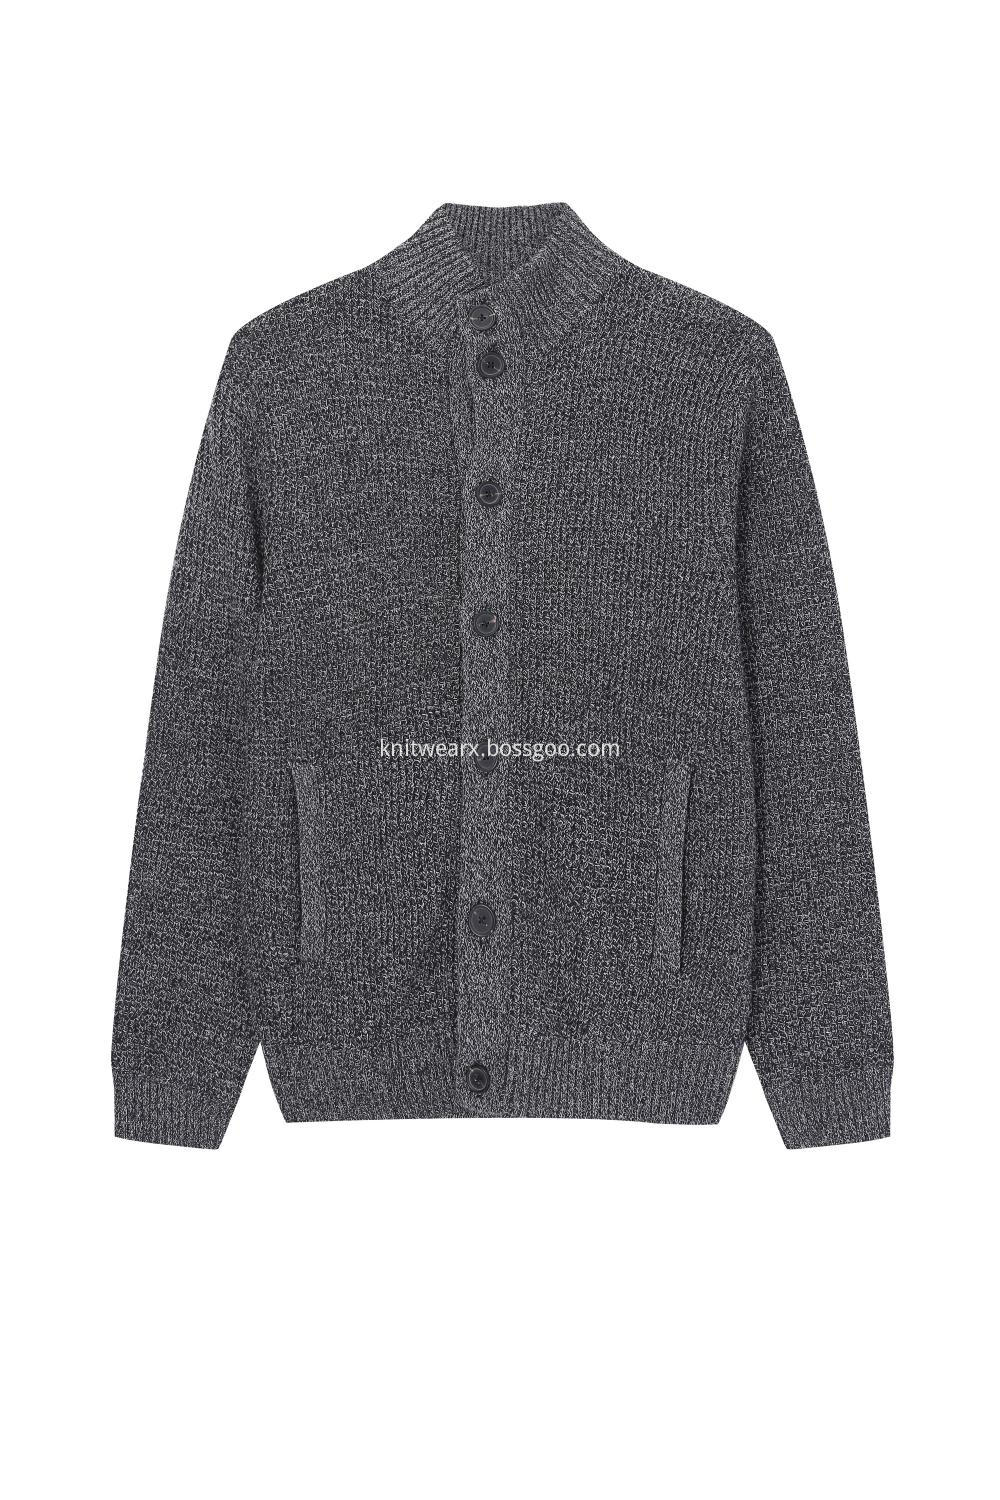 Men's Knitted Stand Collar Textured Buttoned Pocket Cardigan